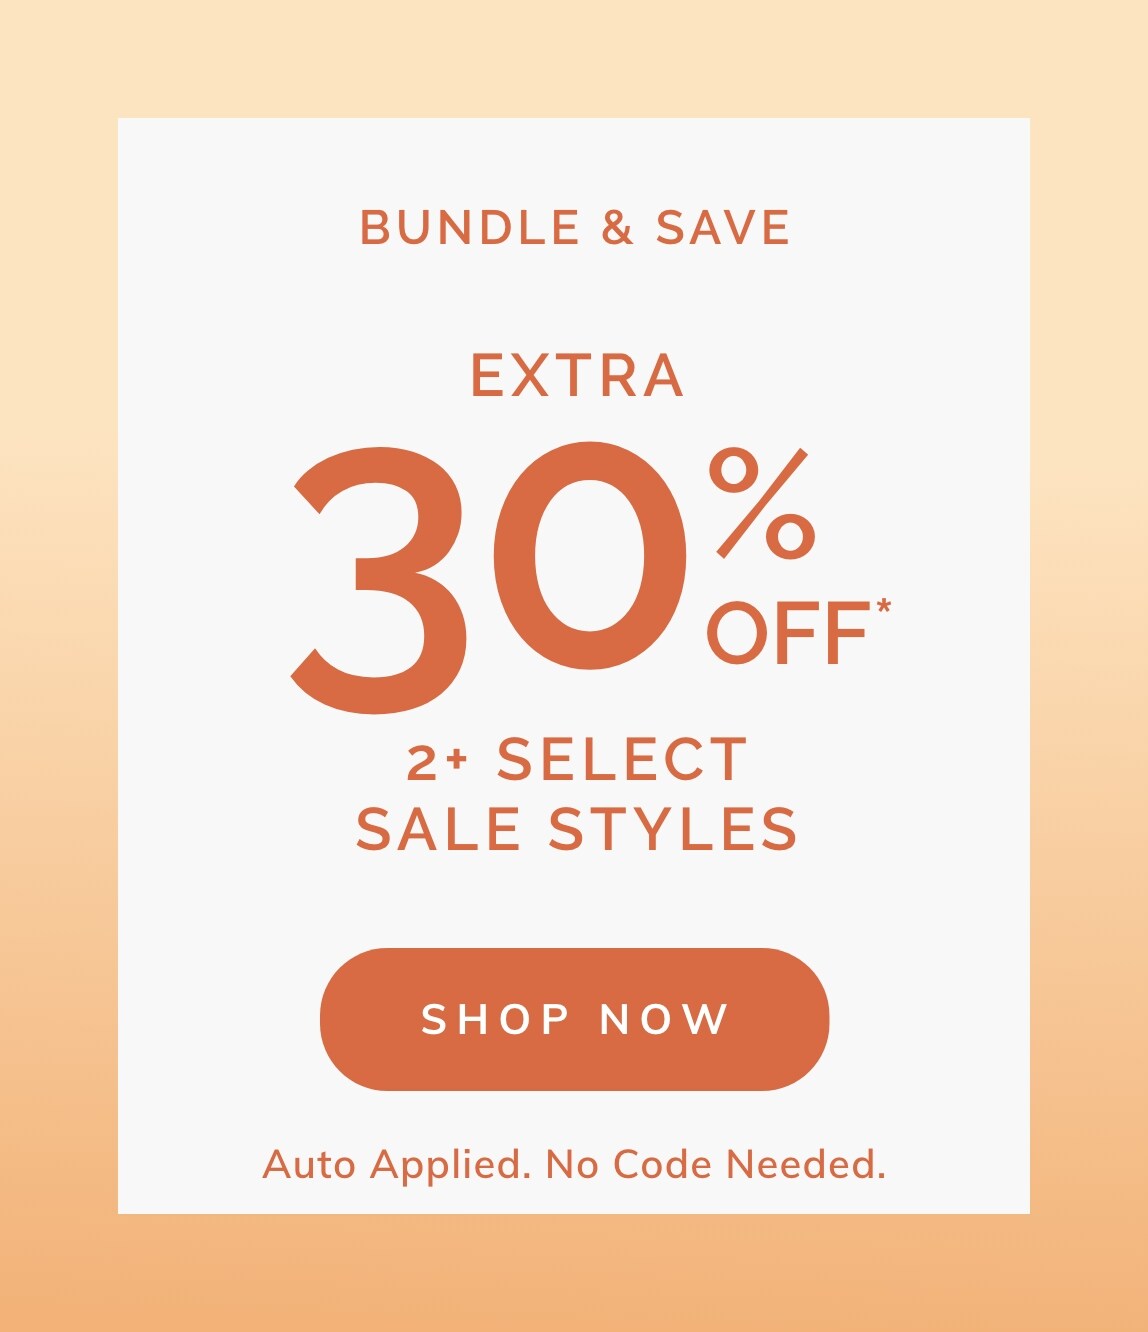 EXTRA 30% OFF* 2+ SELECT SALE STYLES